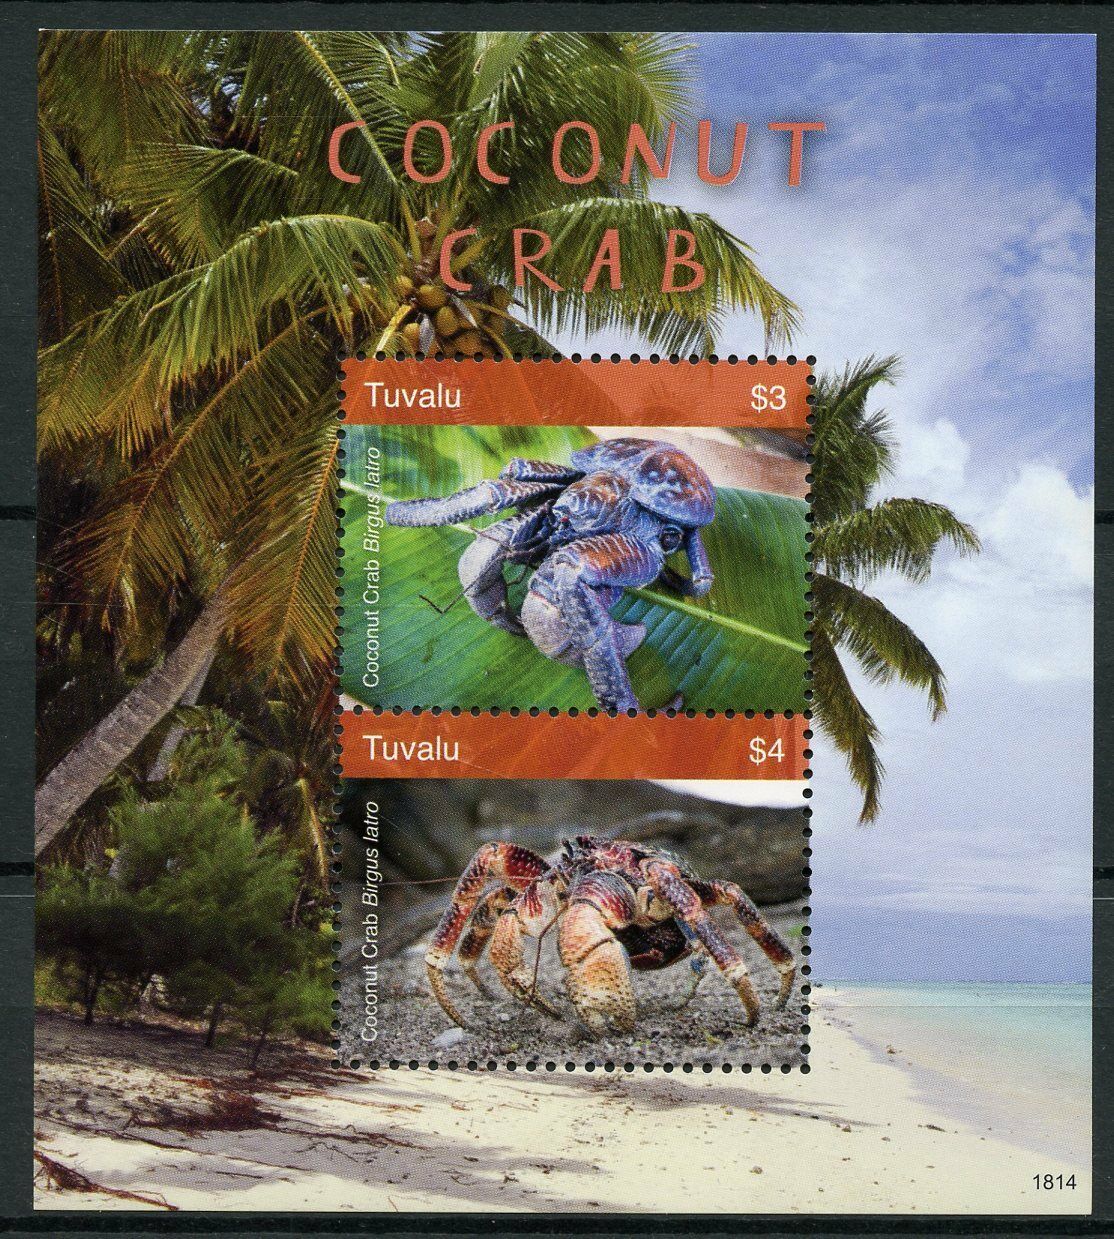 Tuvalu 2018 MNH Marine Animals Stamps Coconut Crab Palm Trees Crabs Crustaceans 2v S/S